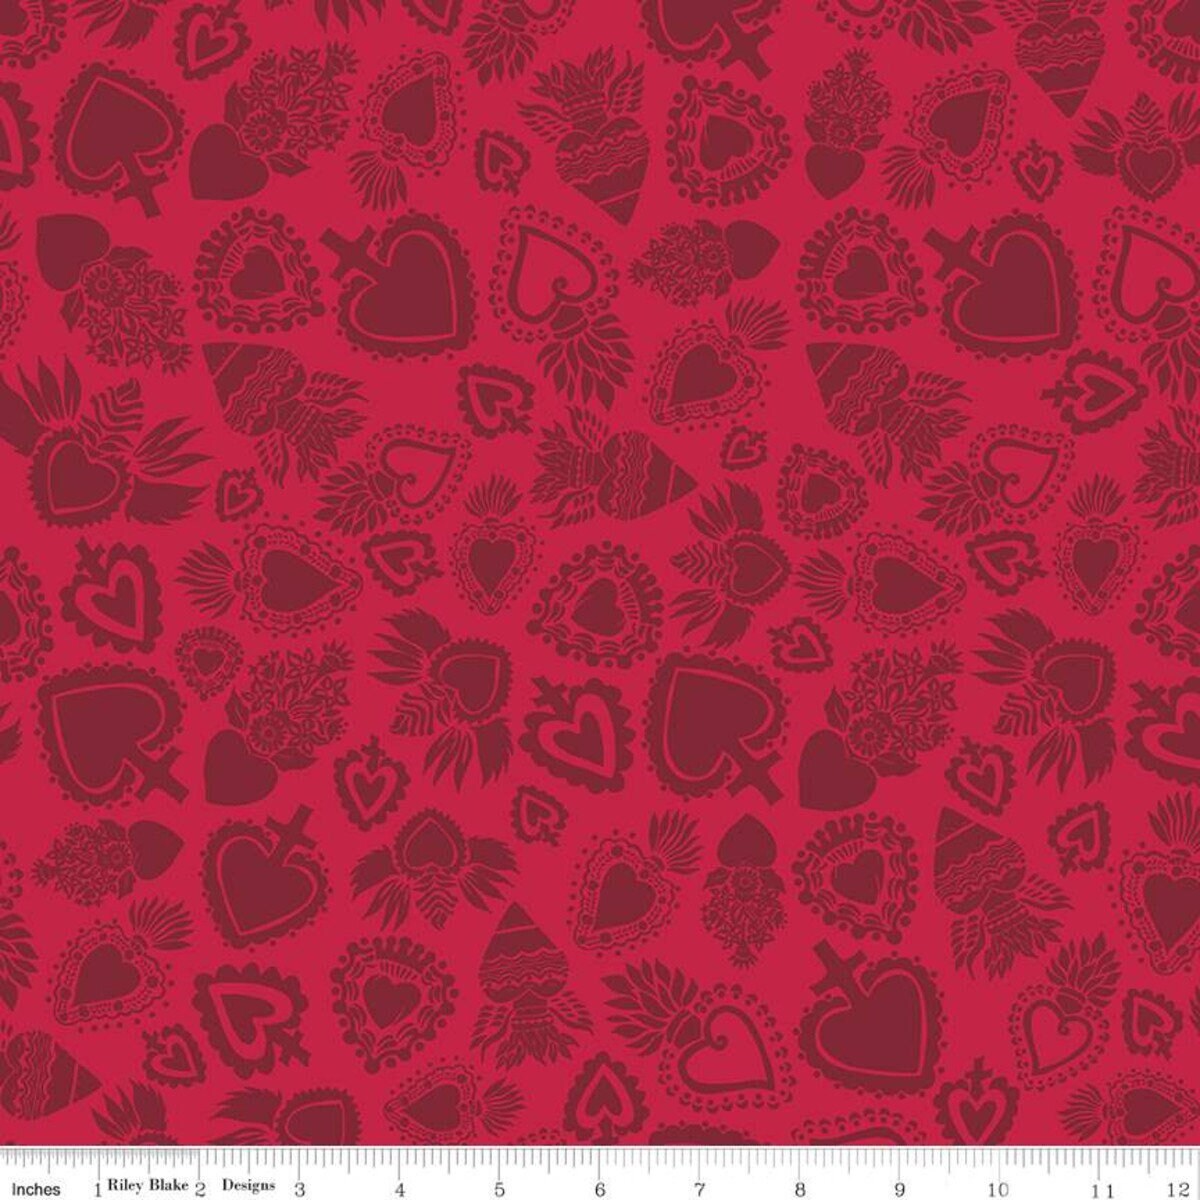 Amor Eterno Hearts Red - LAMINATED Cotton Fabric - Riley Blake